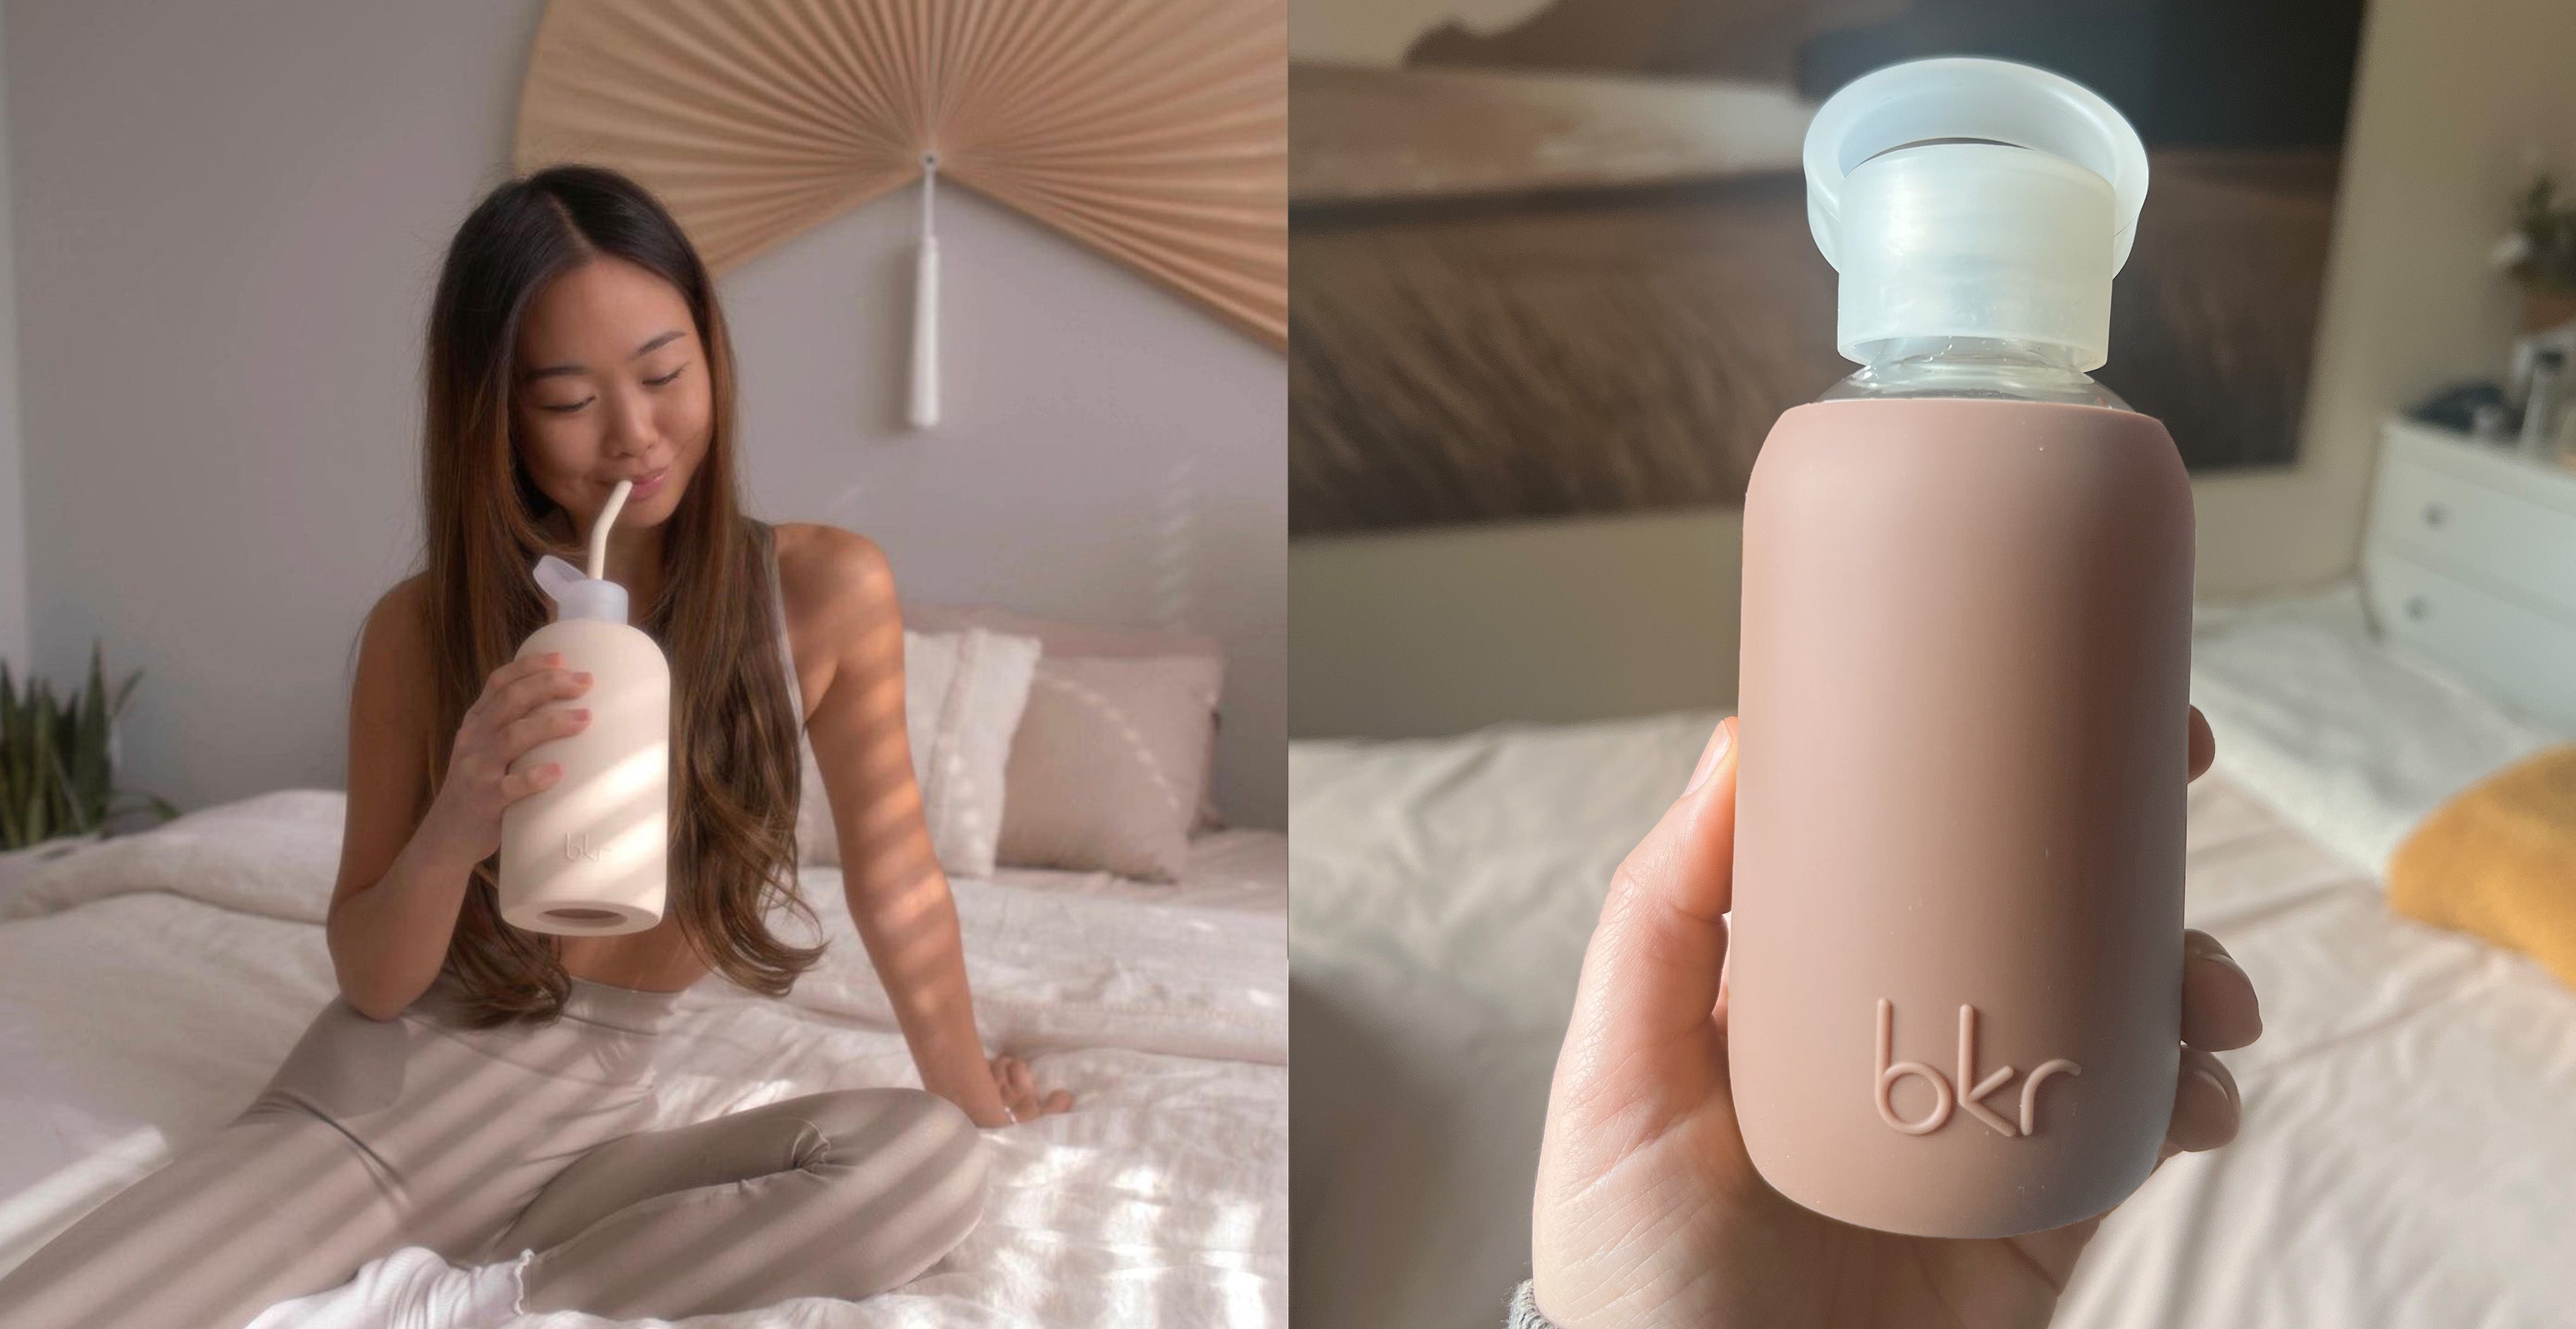 Bkr review: Is the glass water bottle worth it? - Reviewed